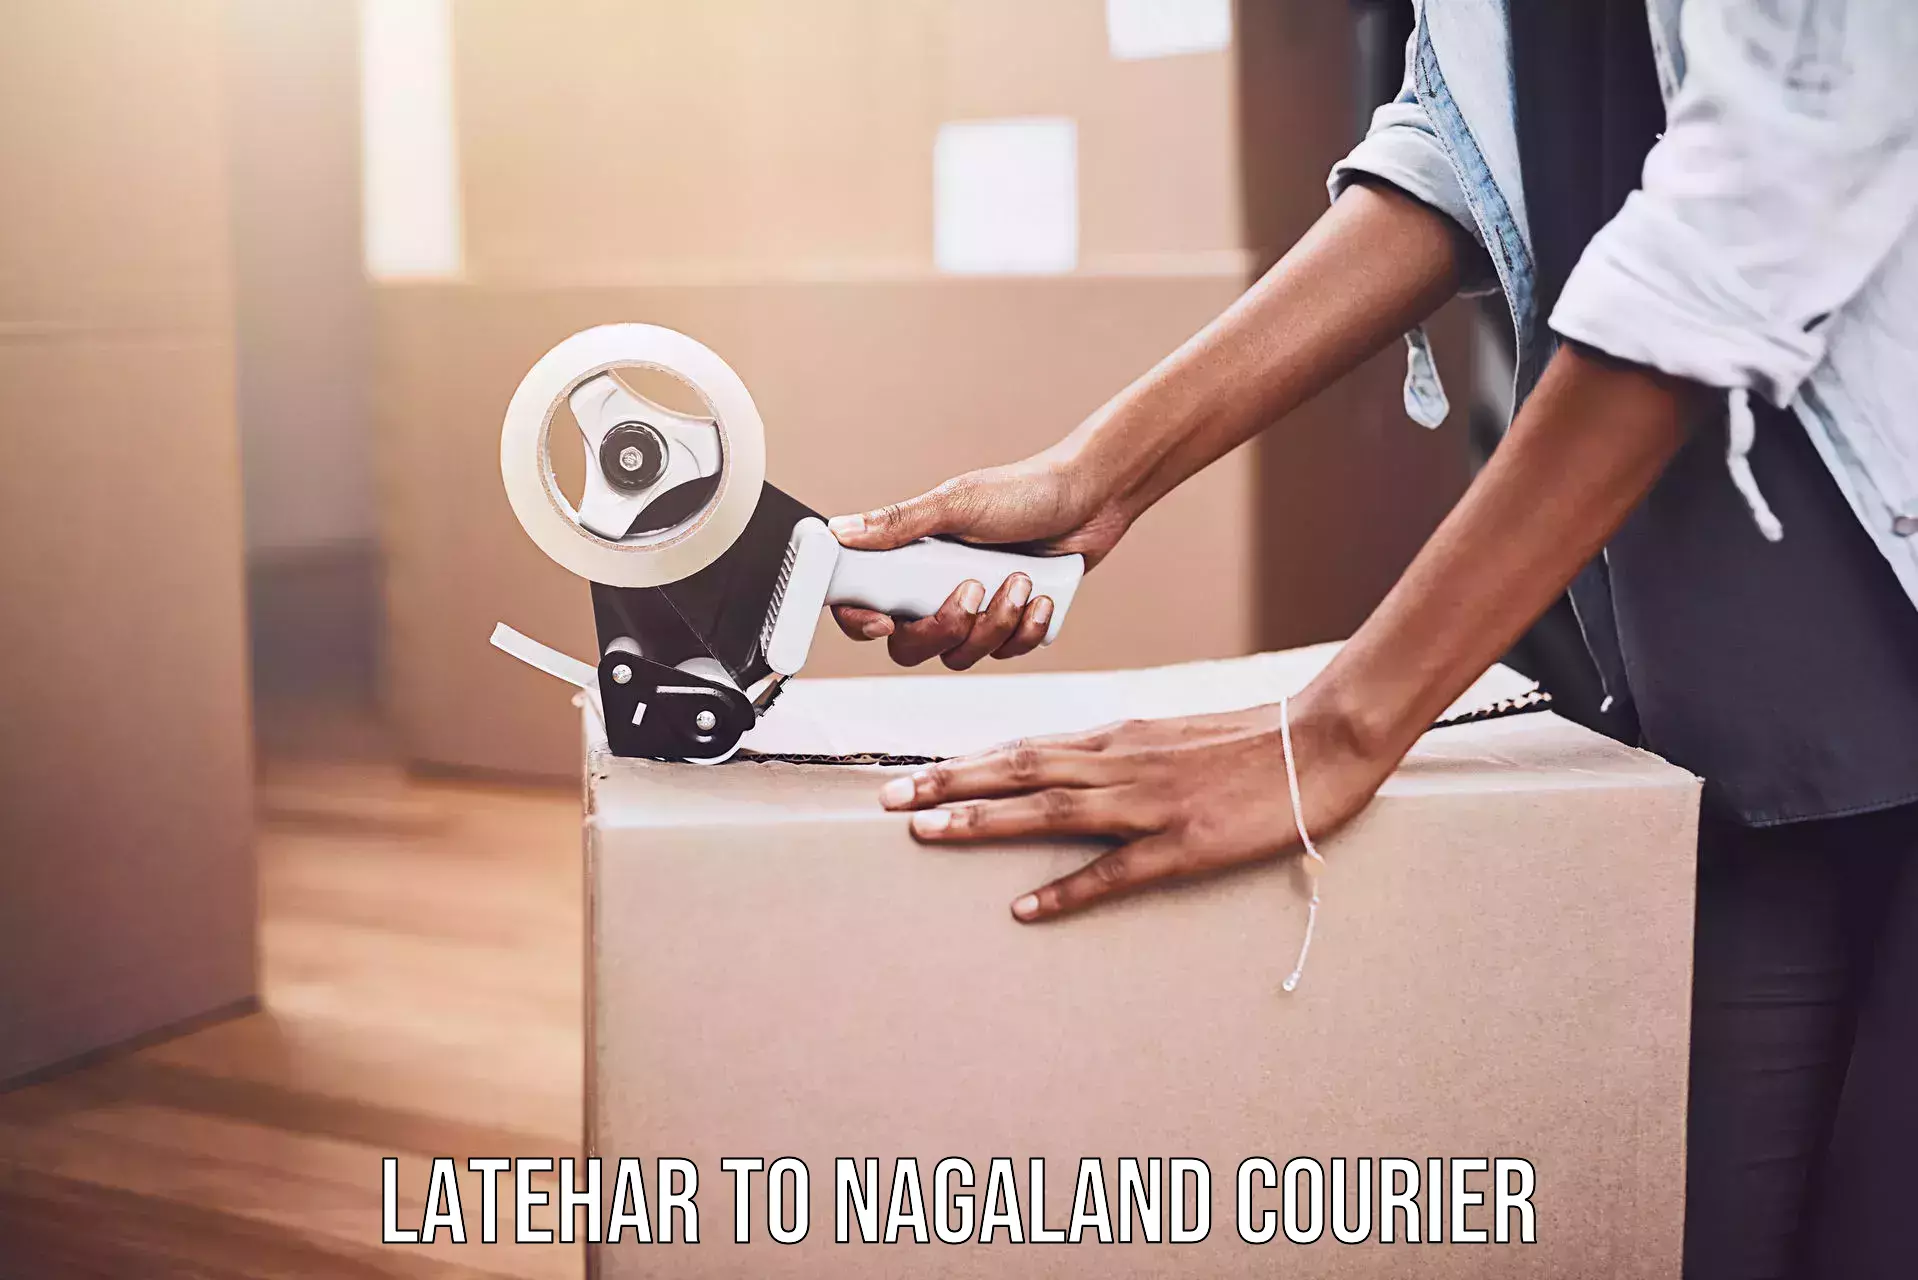 User-friendly delivery service Latehar to Nagaland